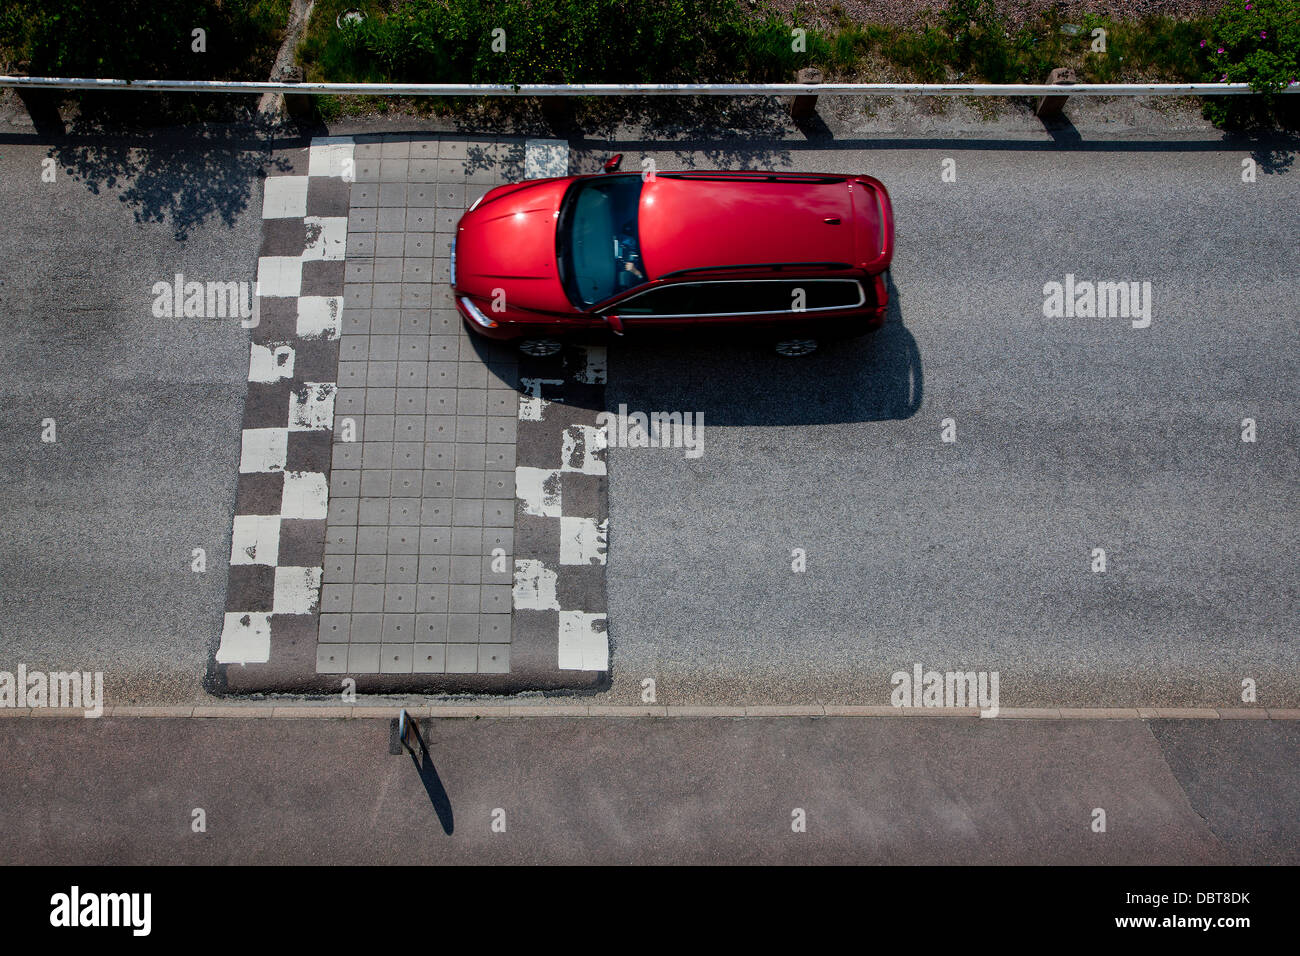 Elevated view of car on road with speed bump Stock Photo